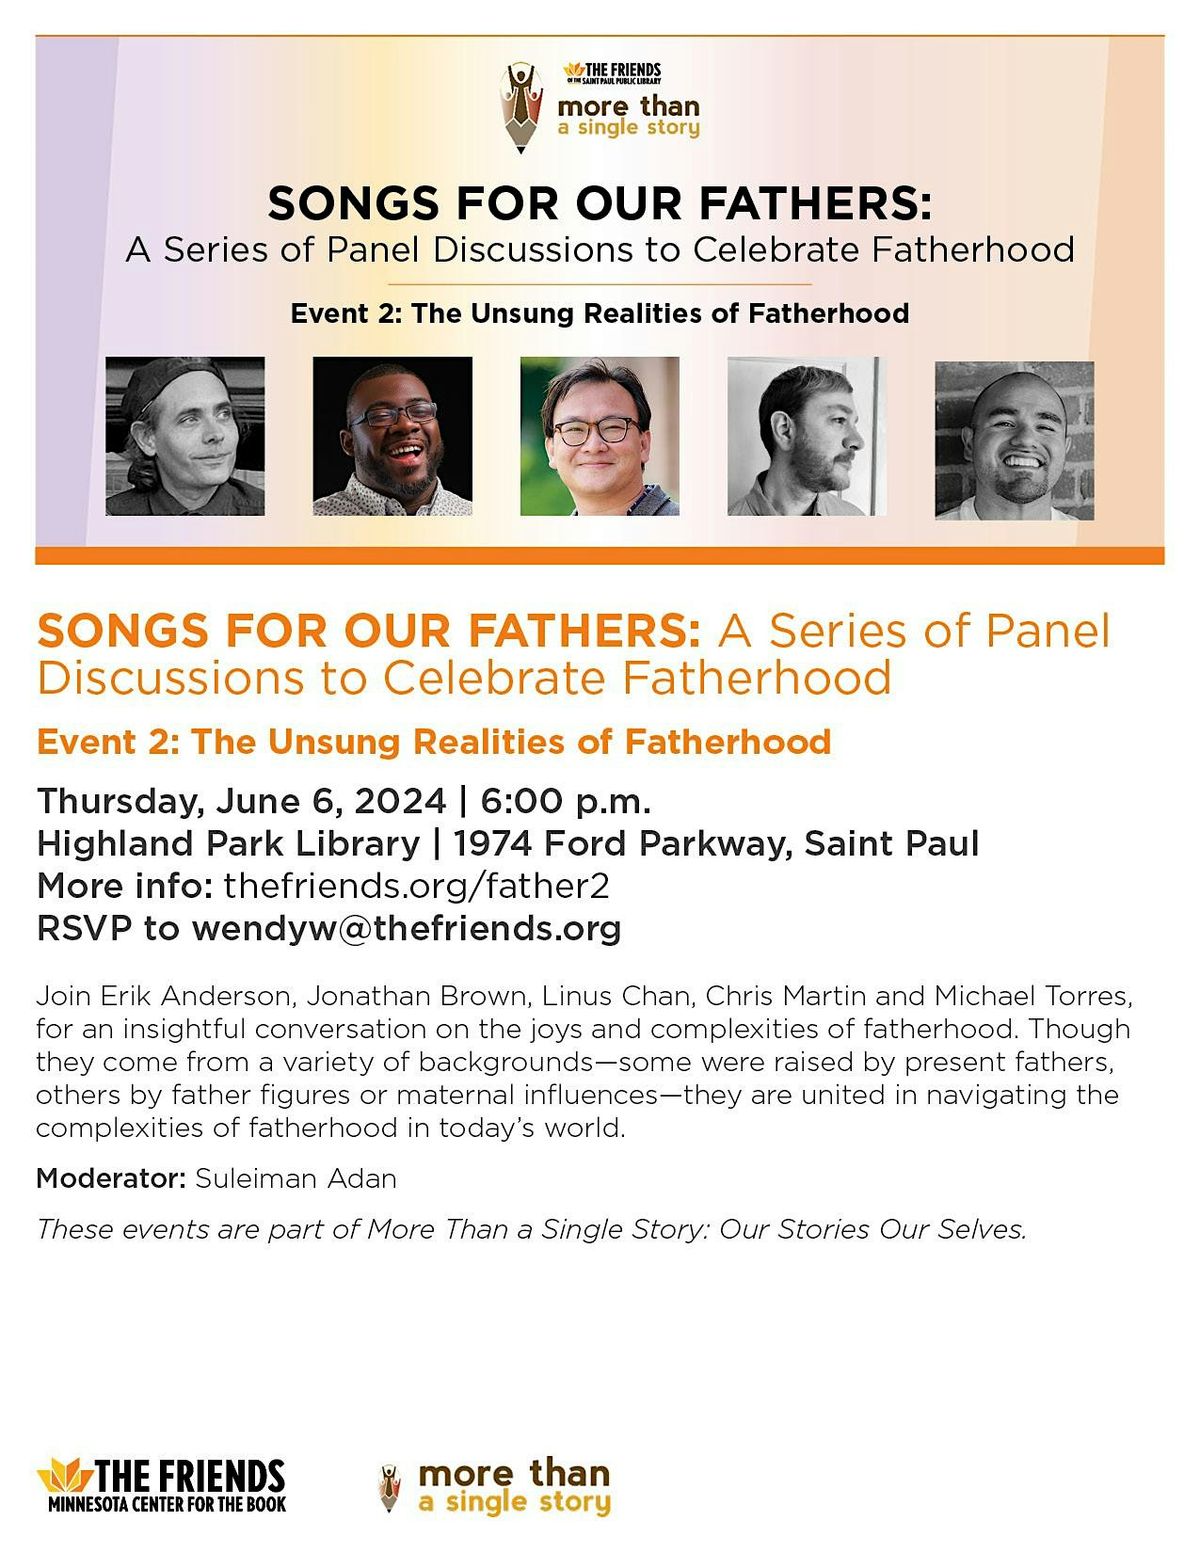 Songs for Our Fathers-Event 2: The Unsung Realities of Fatherhood